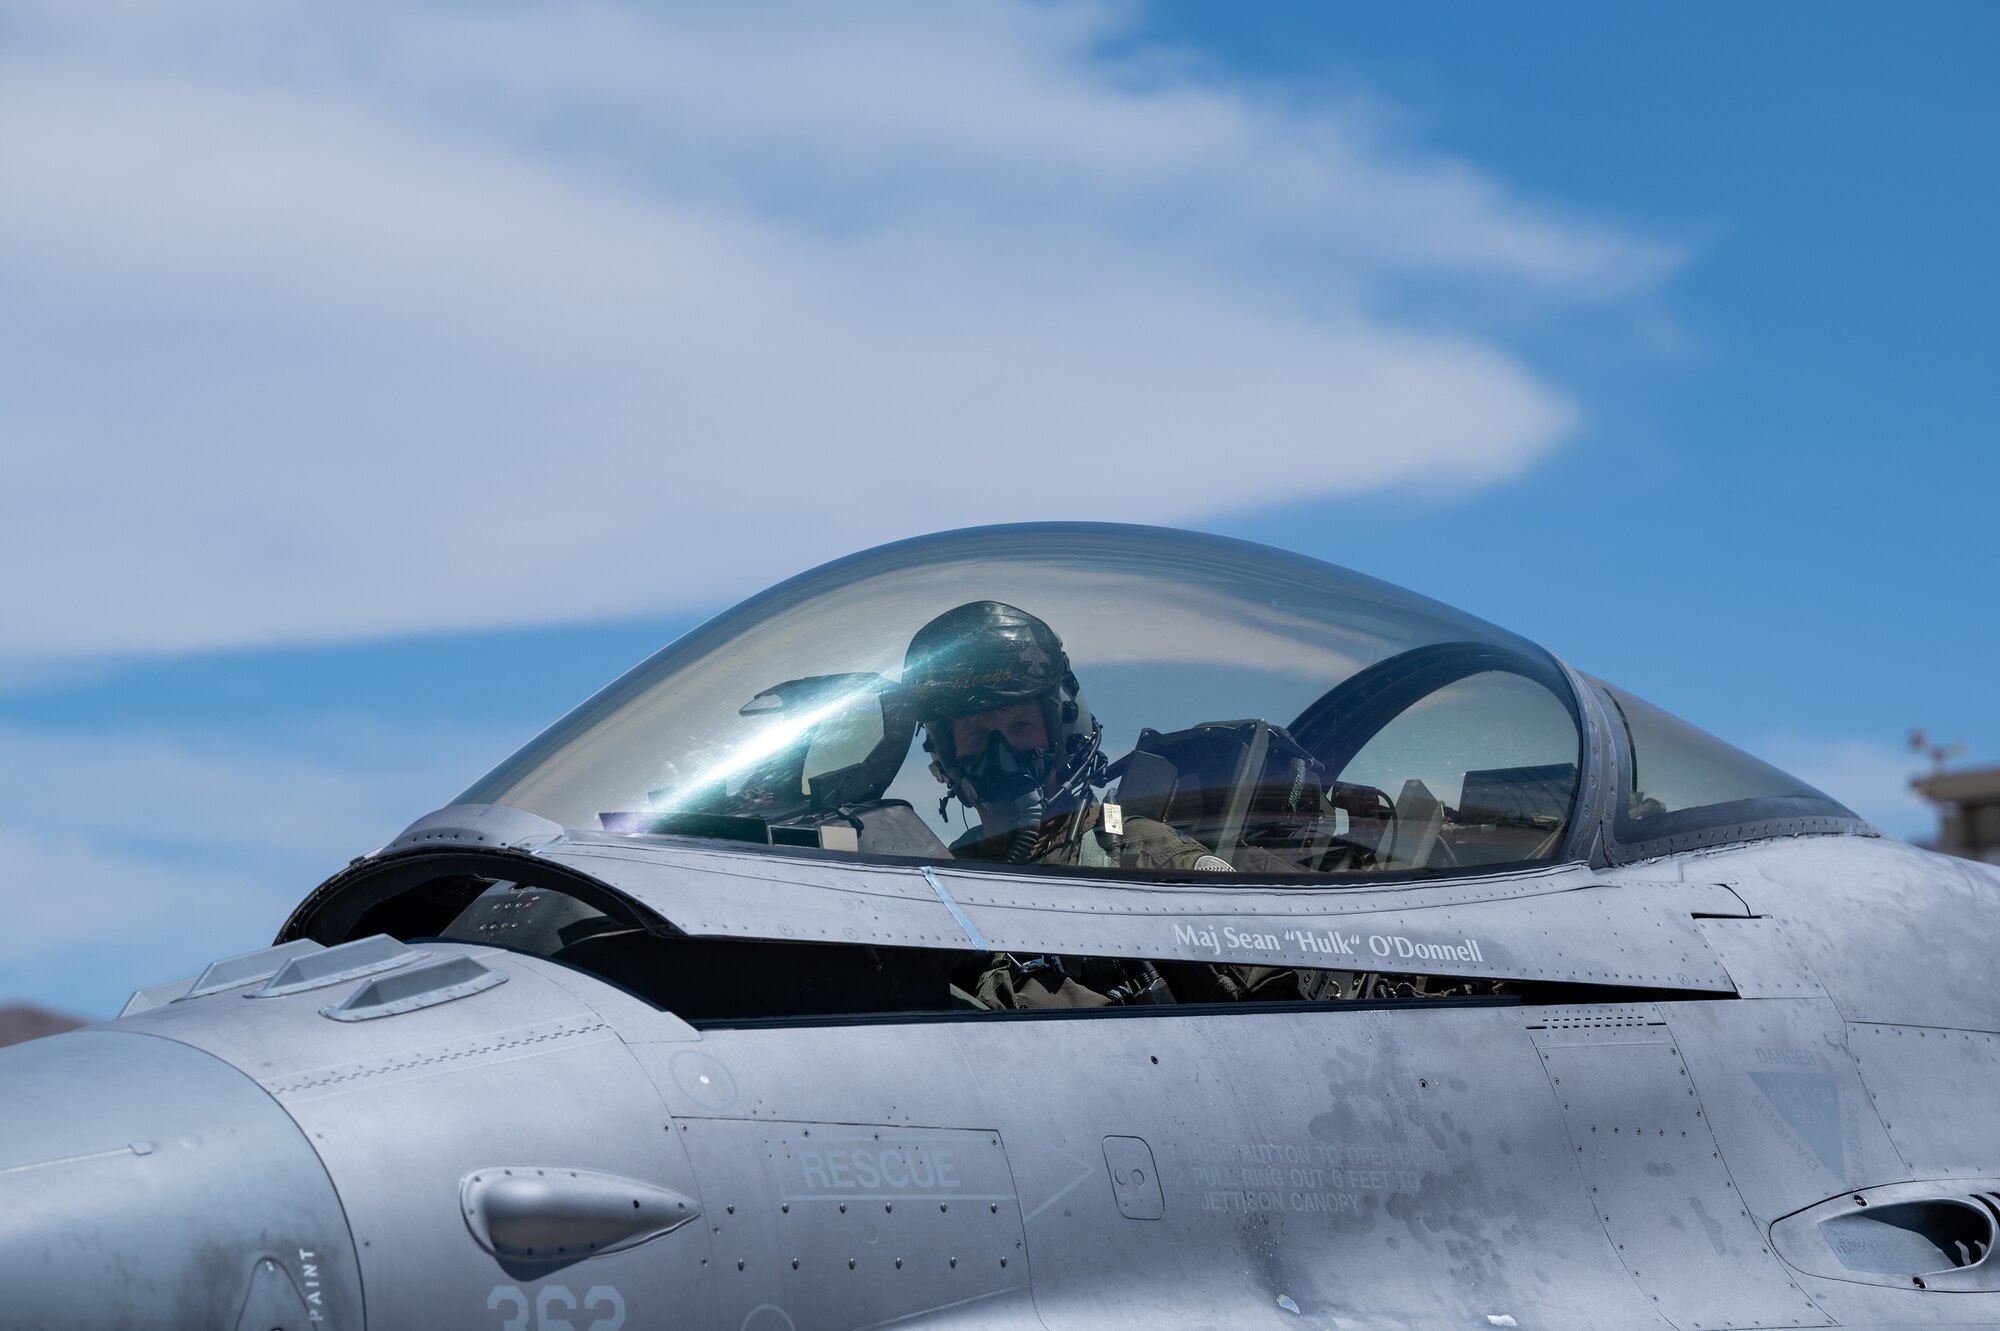 Lt. Col. Kevin "Mongo" Jens, pilot assigned to the 59th Test and Evaluation Squadron, 53d Wing, Eglin Air Force Base, Florida, completes four thousand flight hours as an F-16 pilot at Nellis Air Force Base, Nevada, July 8, 2022. Jens started in A-10s and flew in Desert Storm as a Lt.  and flew his first F-16 in 1997. (U.S. Air Force photo by Airman 1st Class Josey Blades)